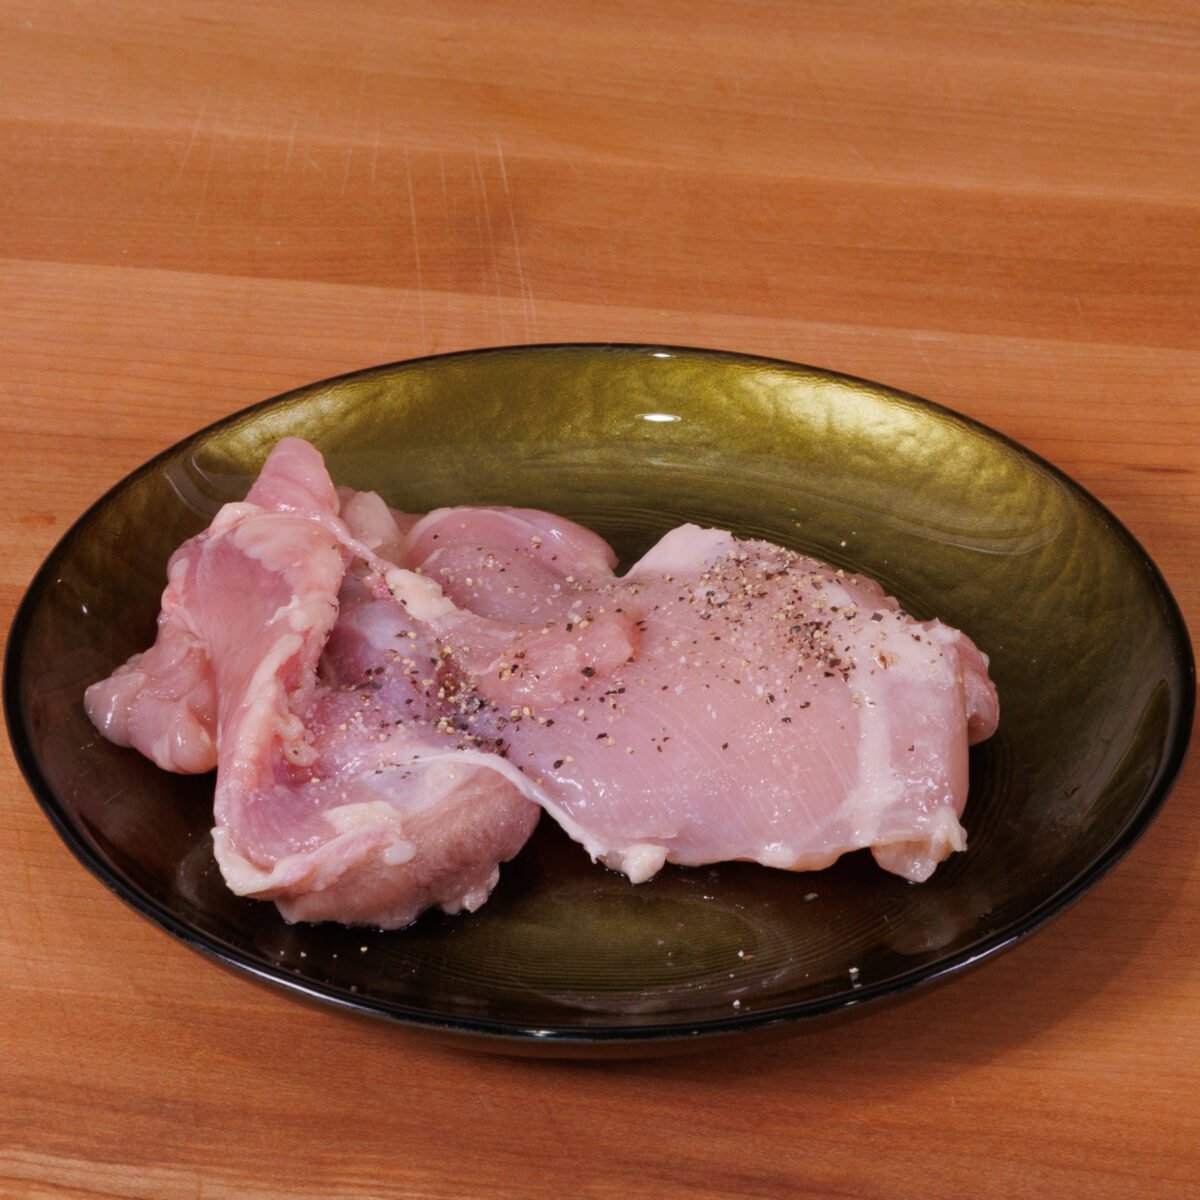 one raw chicken thigh on a green plate.